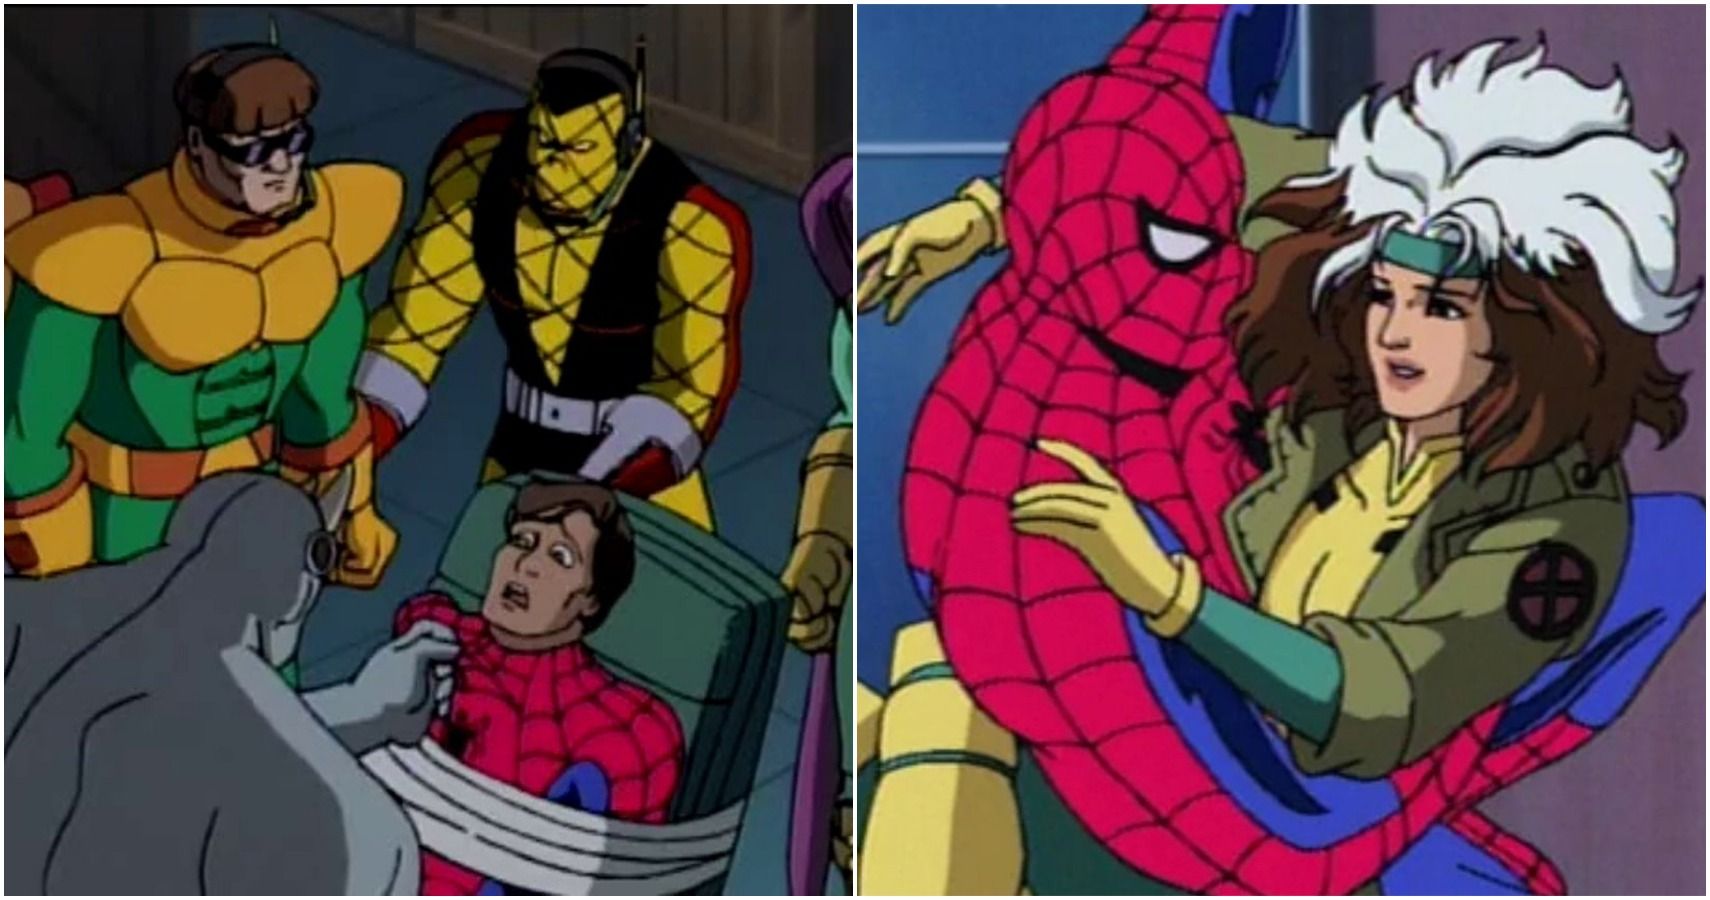 Spider-Man: The Animated Series The 10 Best Episodes Based On IMDb Ratings